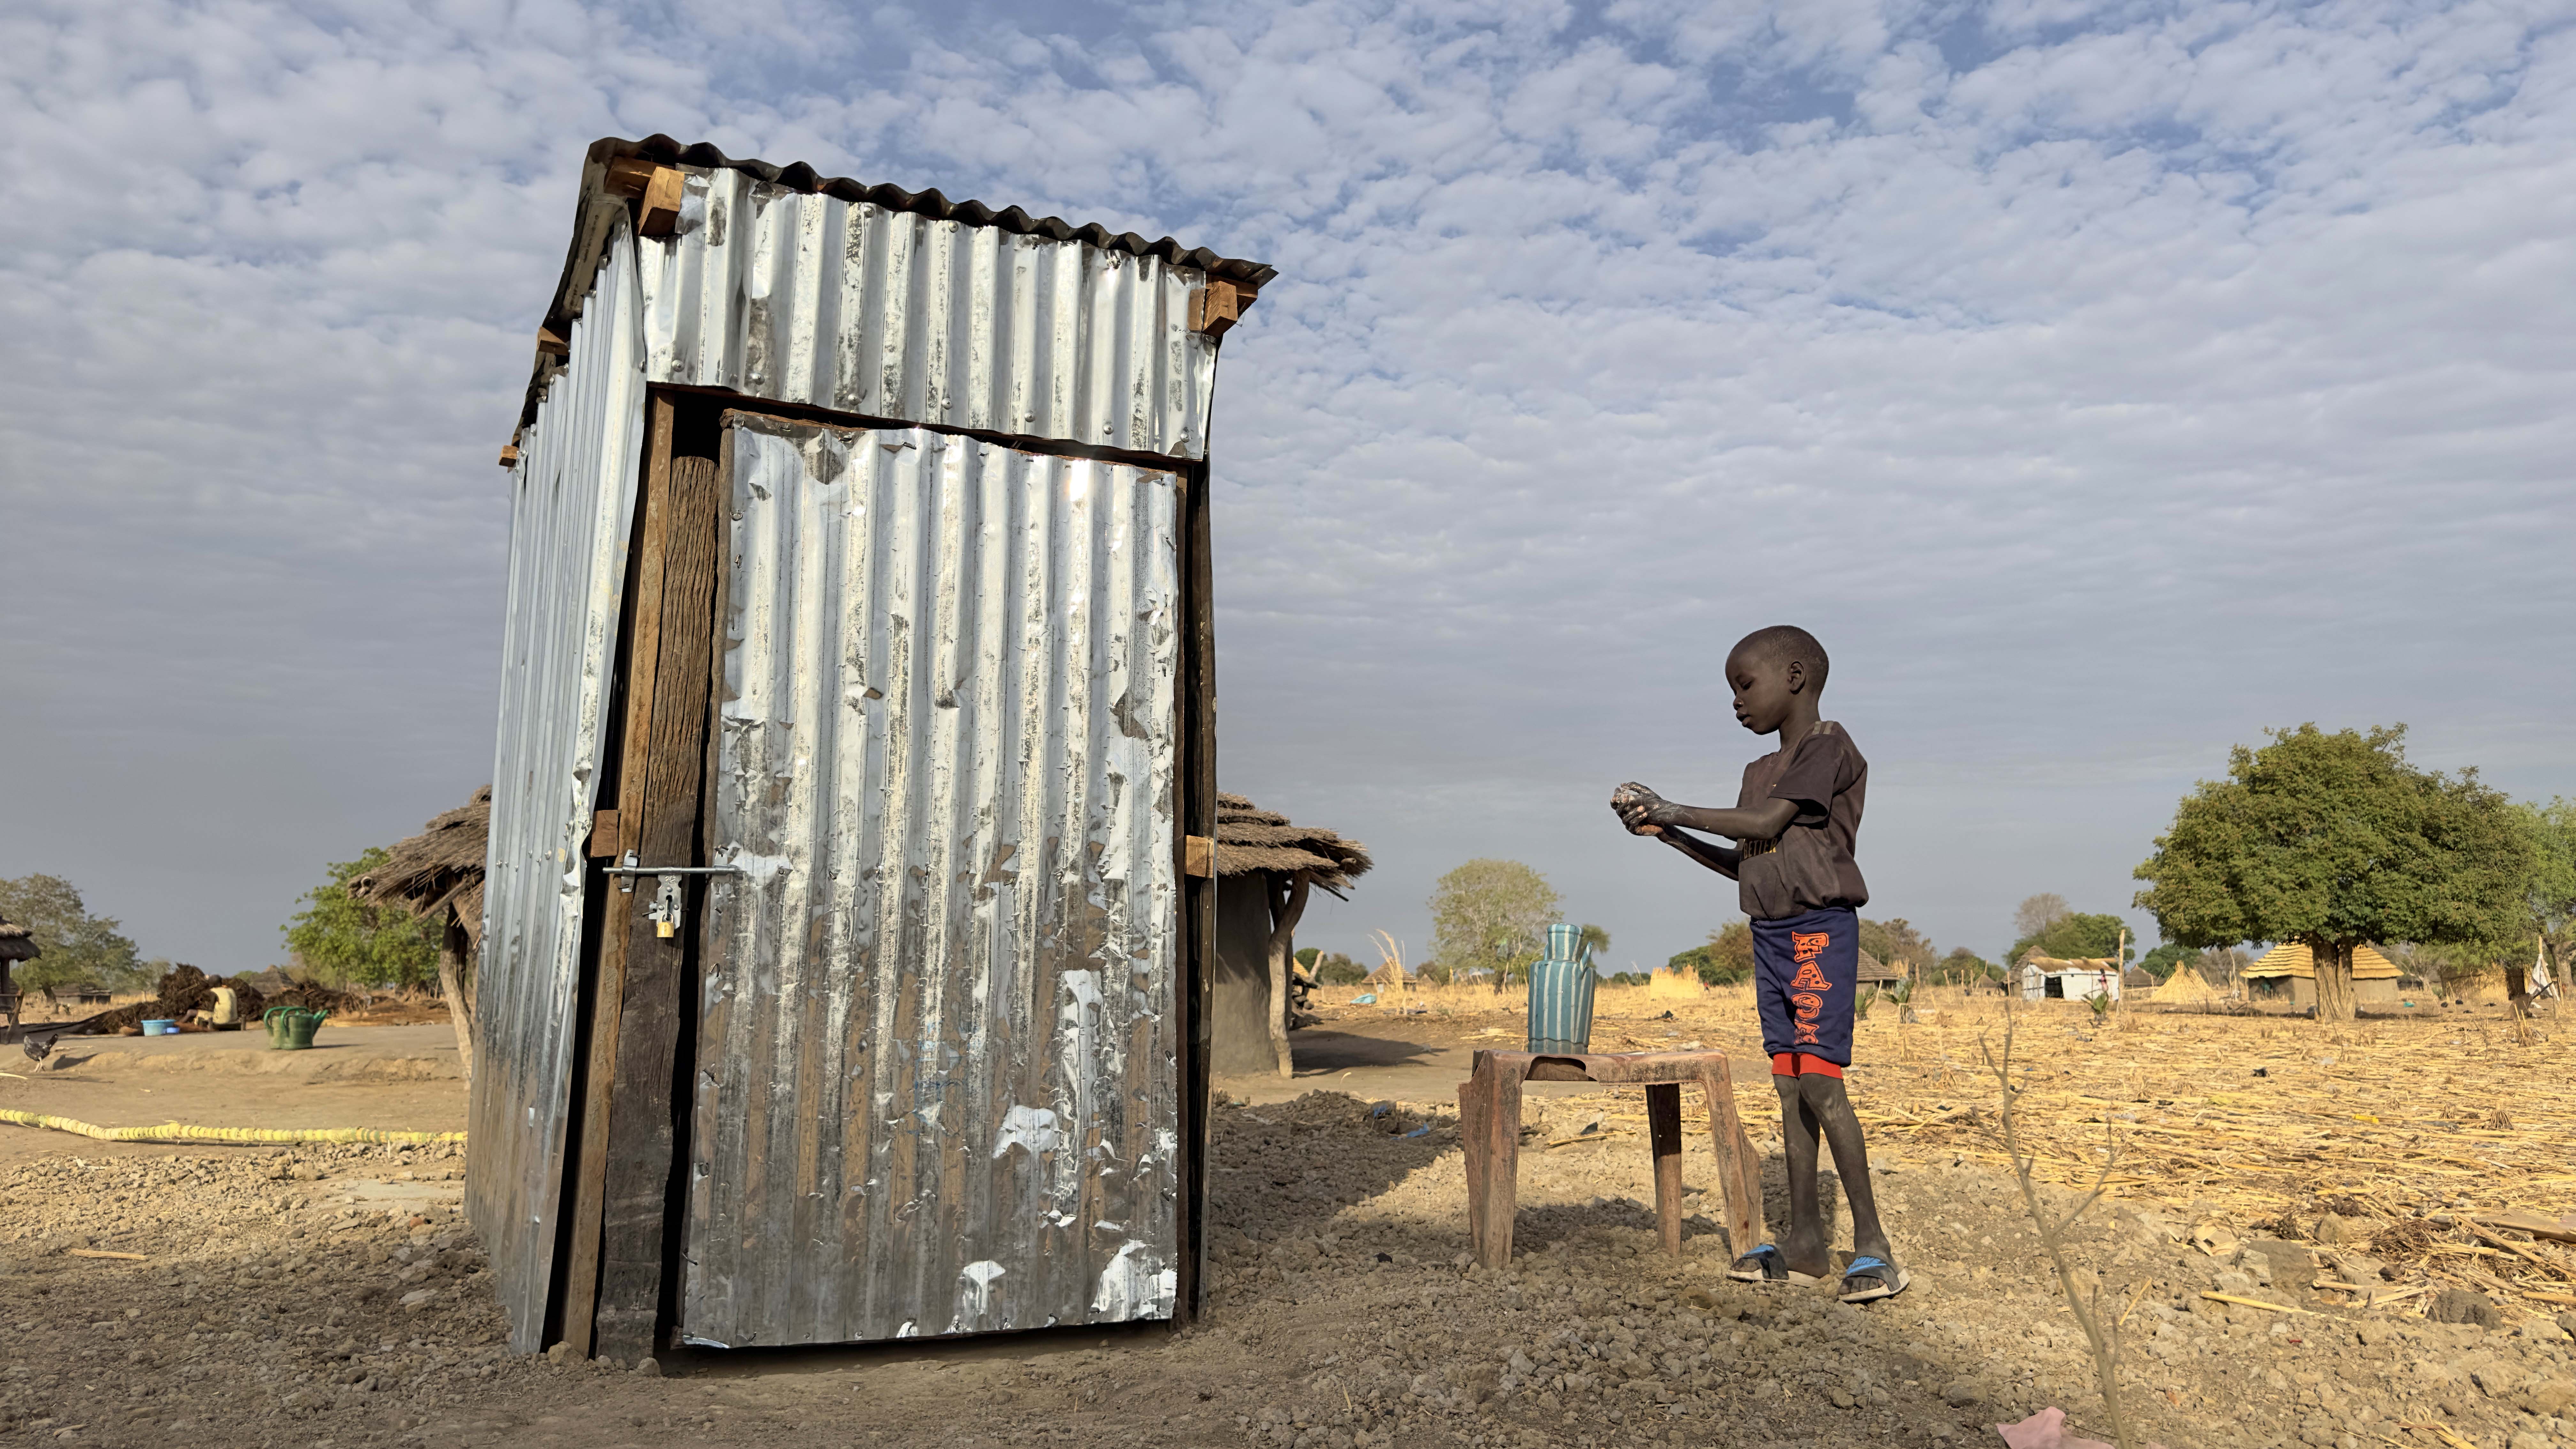 Akur’s 9-year-old son, Deng, washes hand after using the communal emergency pit latrine.